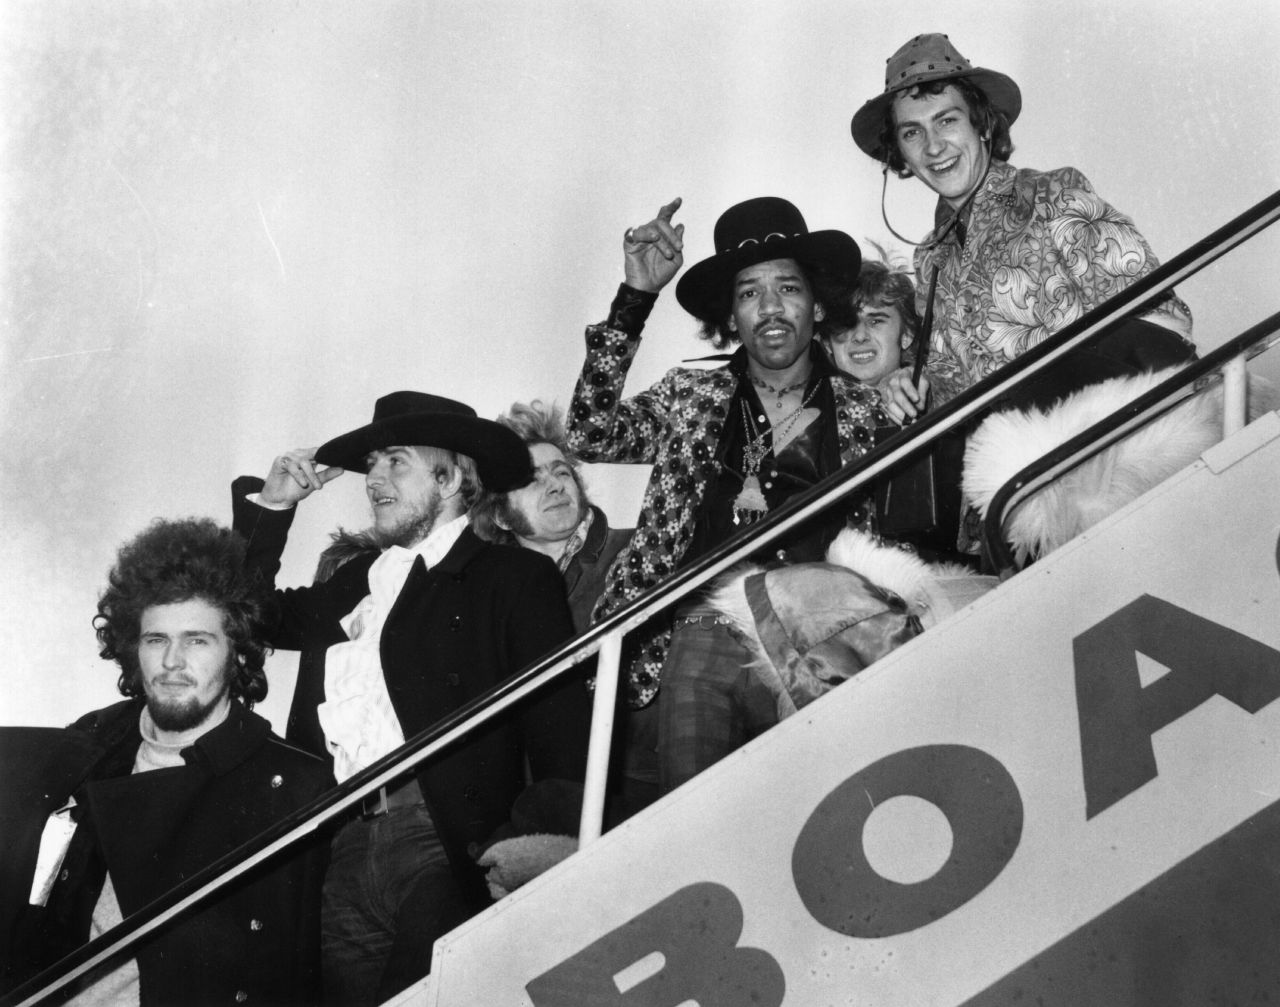 Here, Jimi Hendrix and drummer Mitch Mitchell board a plane in London in 1968, along with various members of the Byrds, the Soft Machine and the Alan Price Set. The Experience disbanded in 1969, but that same year Hendrix gave a memorable performance at Woodstock.